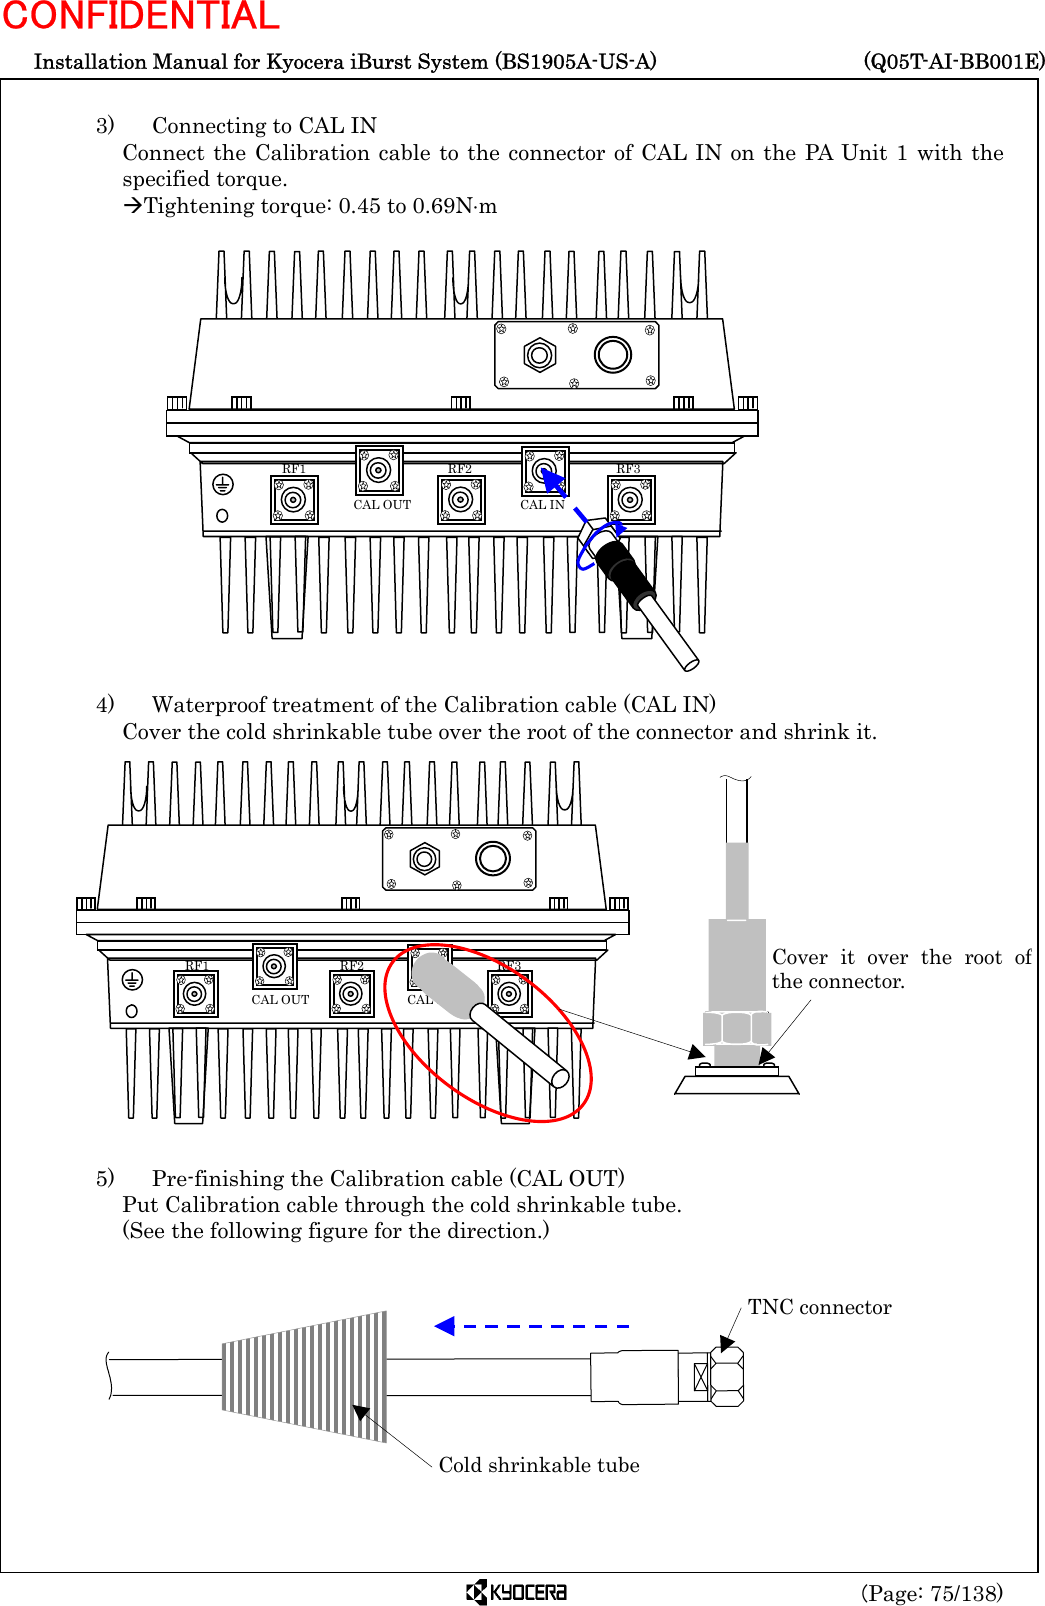  Installation Manual for Kyocera iBurst System (BS1905A-US-A)     (Q05T-AI-BB001E) (Page: 75/138) CONFIDENTIAL  3)    Connecting to CAL IN Connect the Calibration cable to the connector of CAL IN on the PA Unit 1 with the specified torque. ÆTightening torque: 0.45 to 0.69N⋅m                   4)    Waterproof treatment of the Calibration cable (CAL IN) Cover the cold shrinkable tube over the root of the connector and shrink it.                 5)    Pre-finishing the Calibration cable (CAL OUT) Put Calibration cable through the cold shrinkable tube.   (See the following figure for the direction.)         Cold shrinkable tubeTNC connector   RF3 RF2 RF1 CAL OUT  CAL IN Cover it over the root ofthe connector.    RF3 RF2 RF1 CAL OUT  CAL IN 